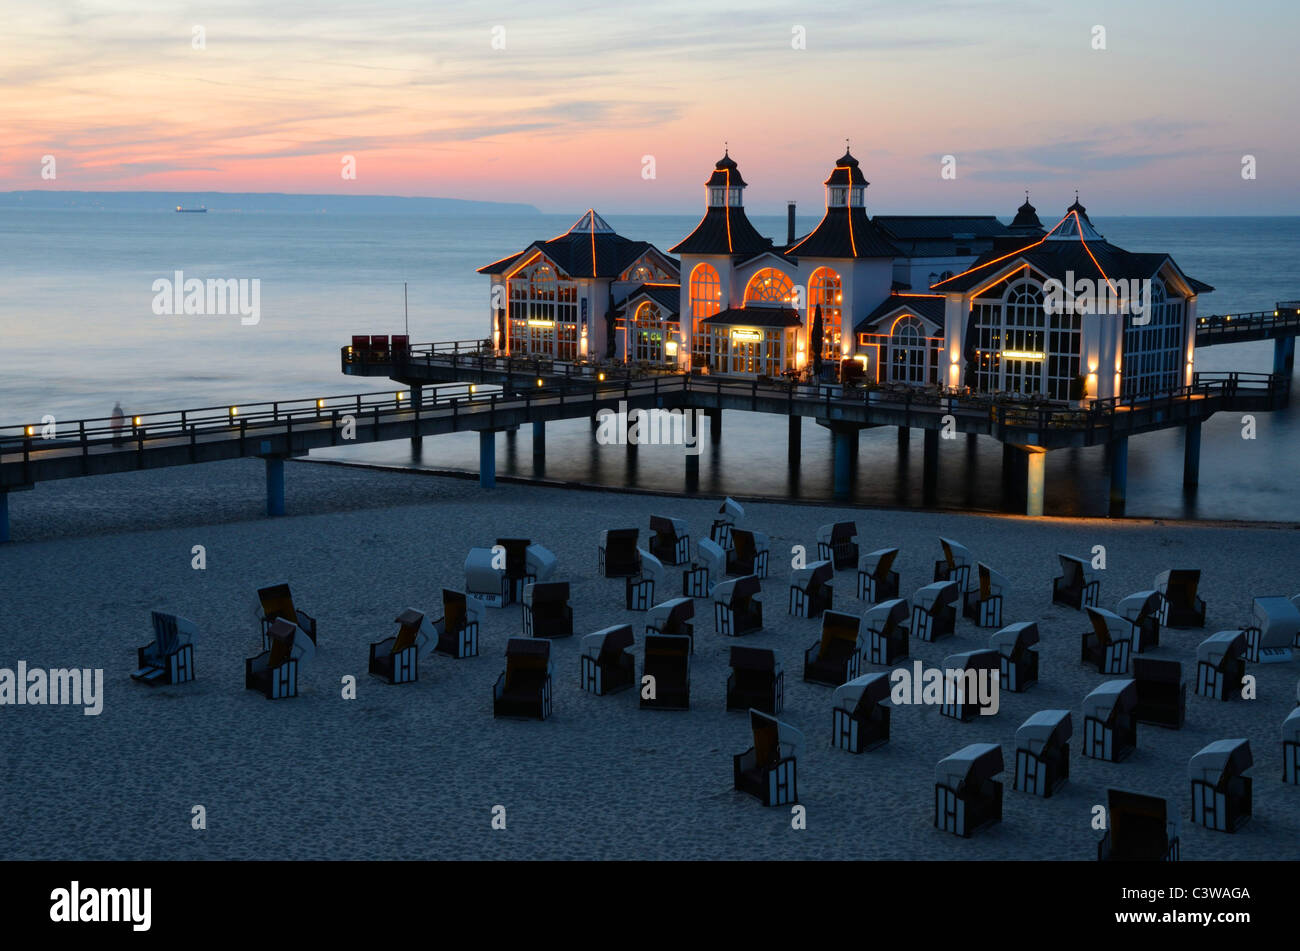 Pier of Sellin on German island of Rugen, Baltic Coast, at night Stock Photo